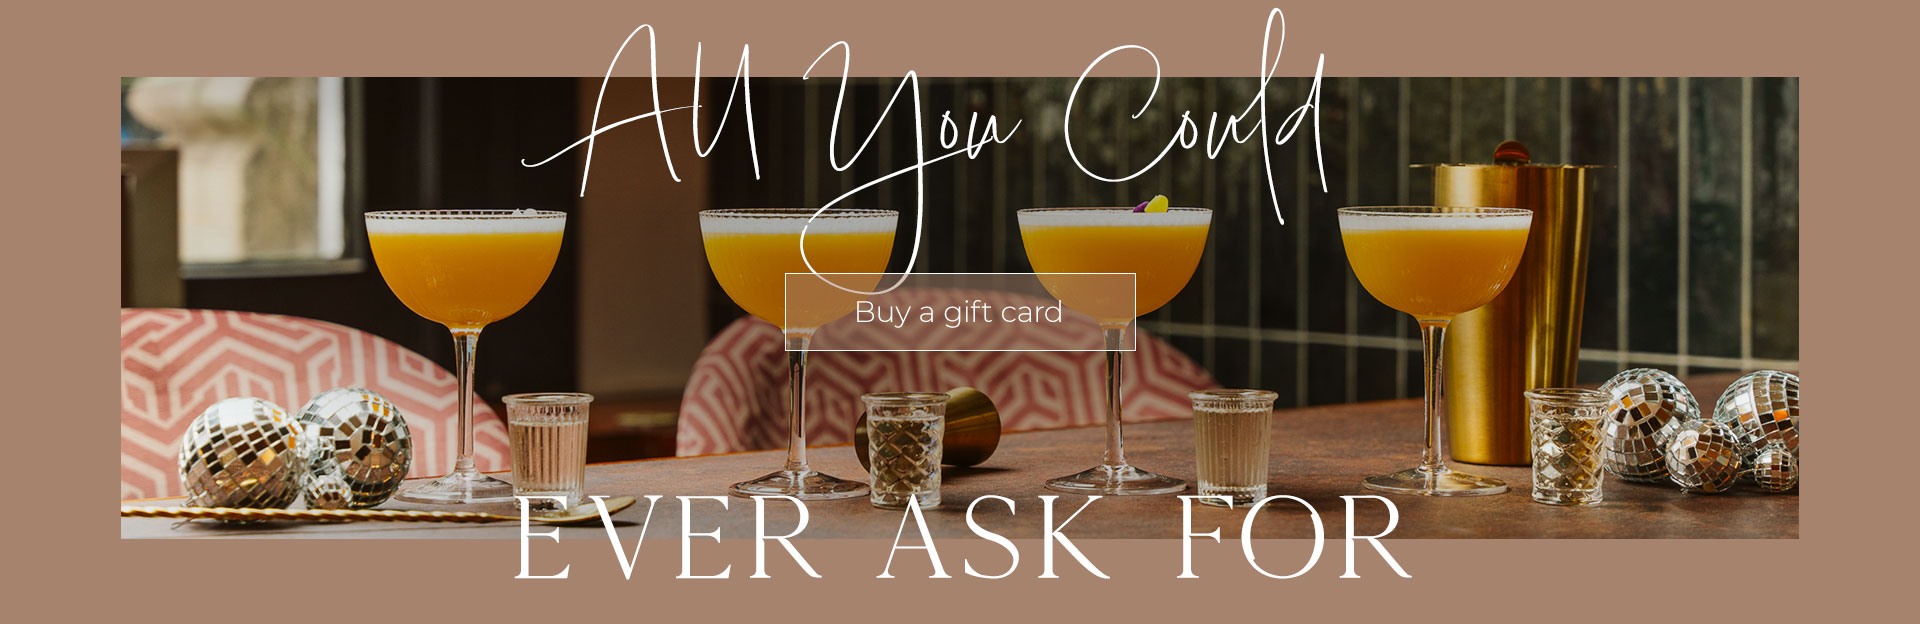 All Bar One Gift Cards at All Bar One Cambridge